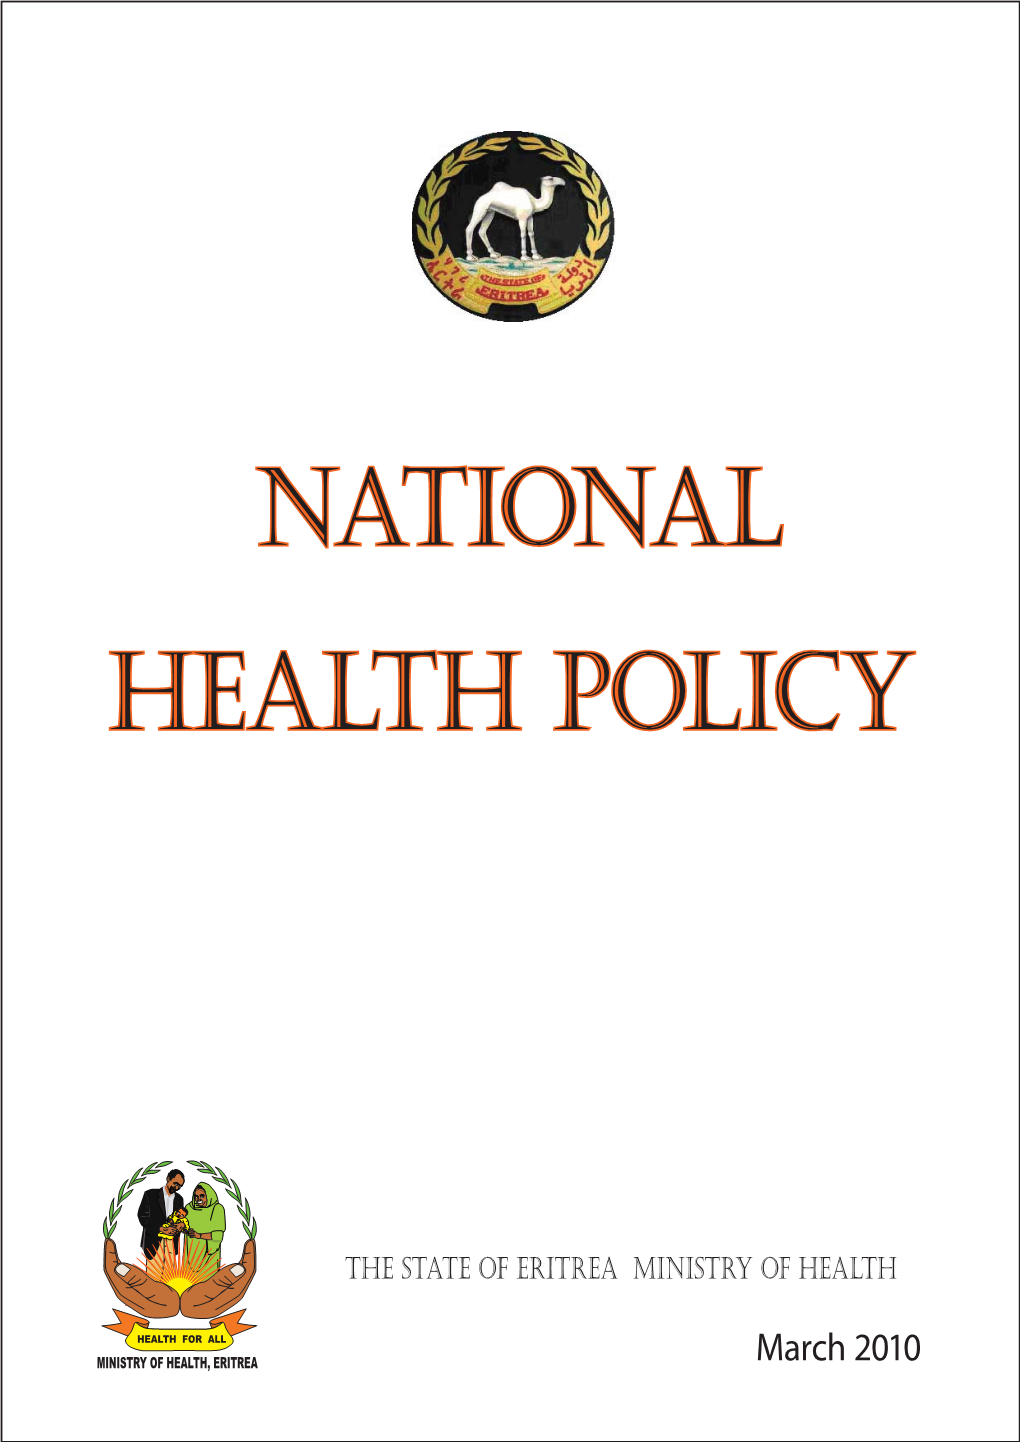 National Health Policy